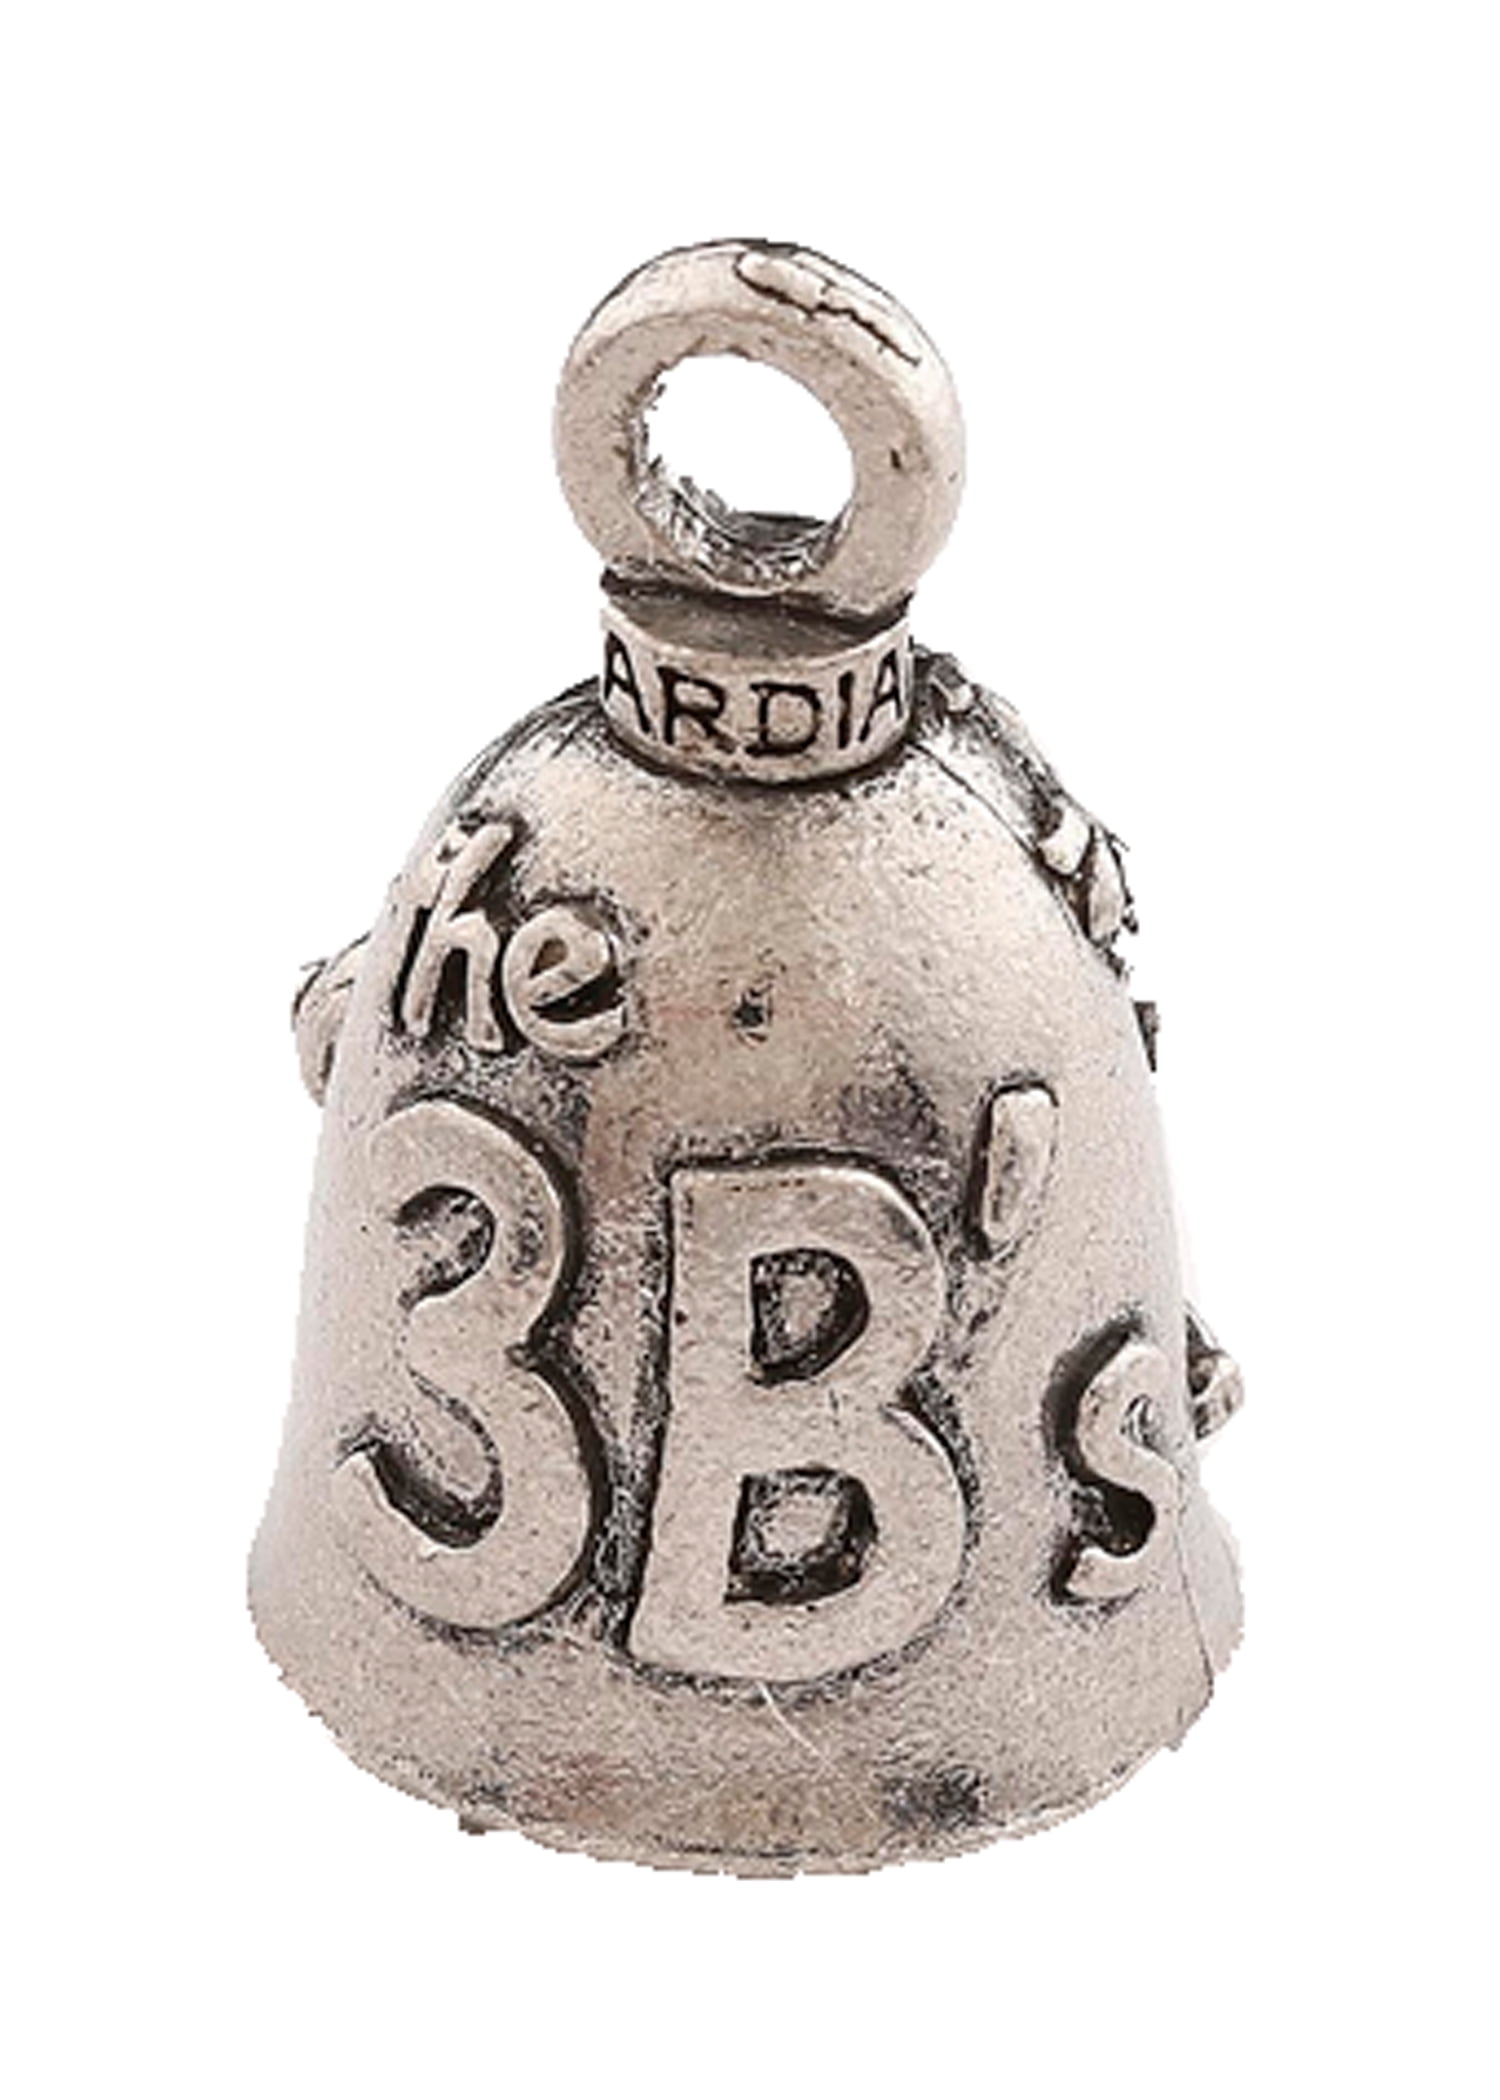 BOOBS BIKES & BEER Guardian® Bell Motorcycle Harley Accessory HD Gremlin NEW